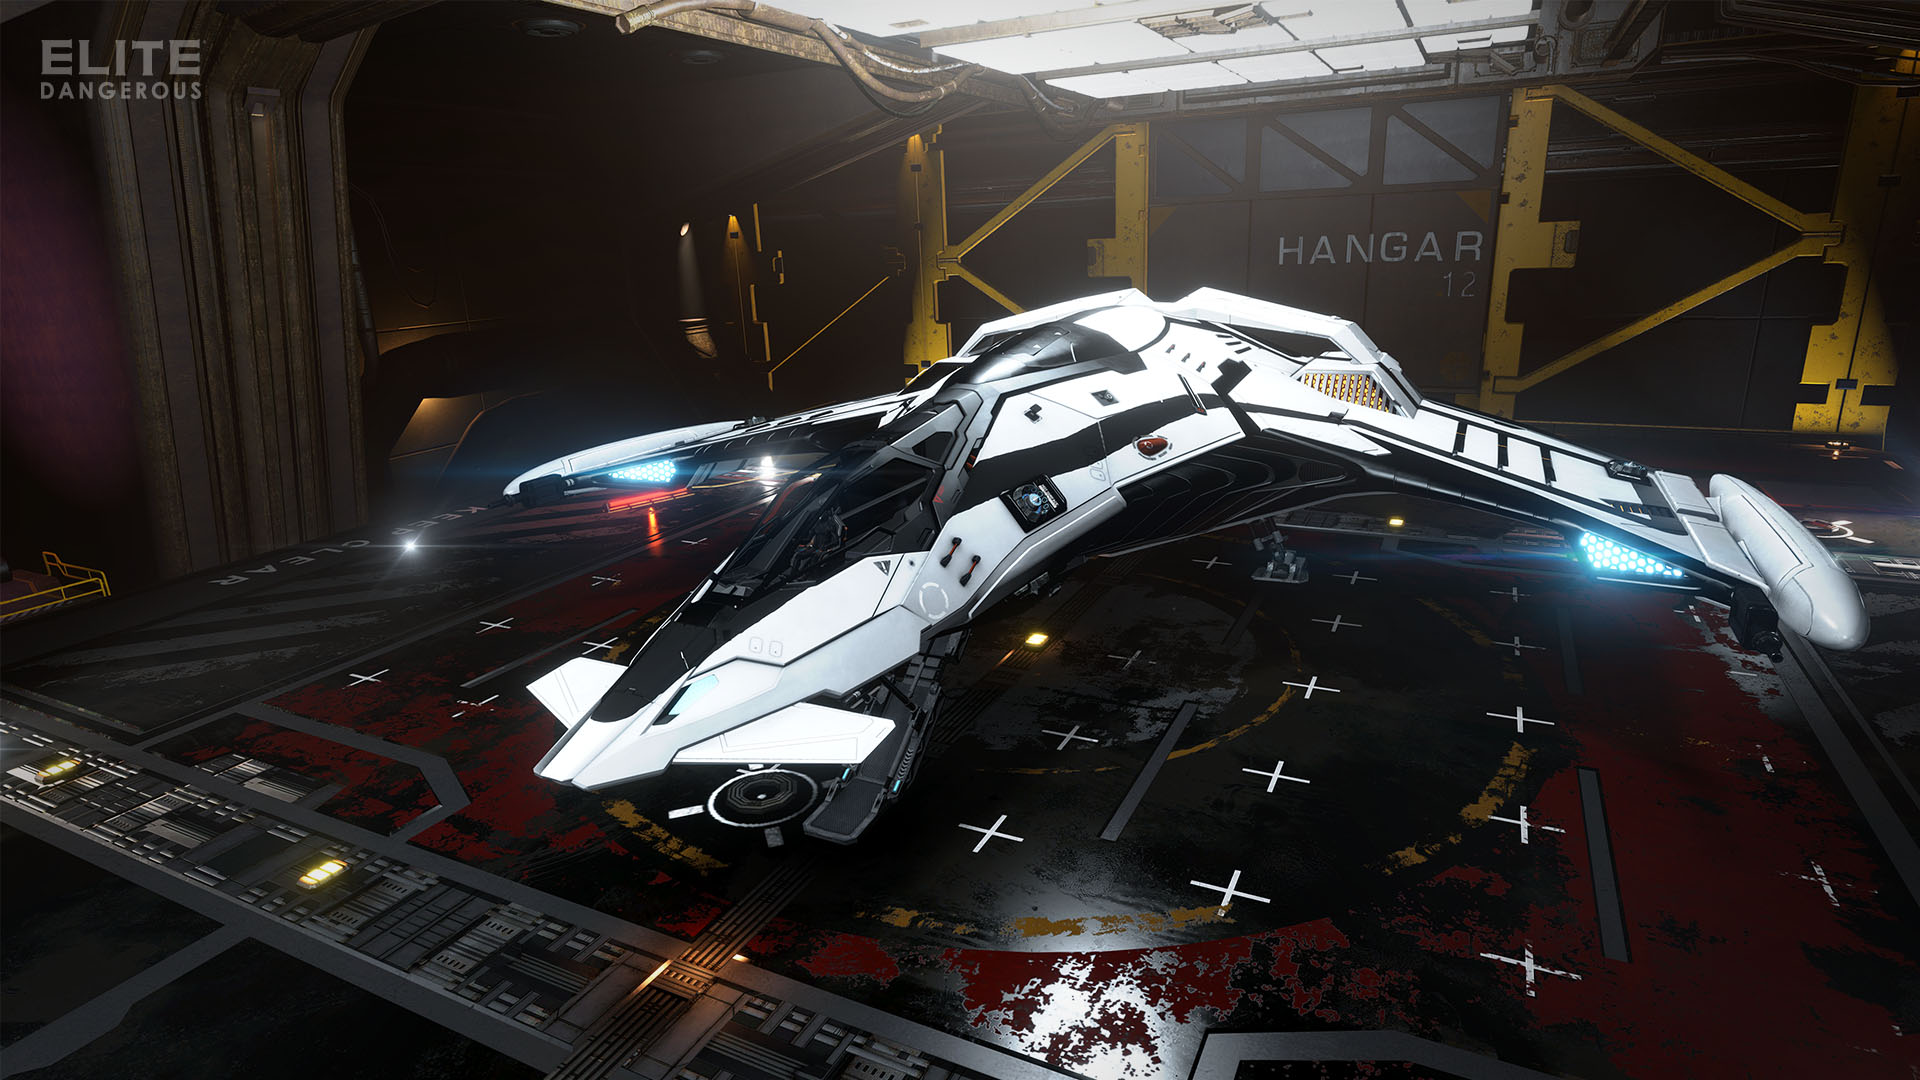 At øge ecstasy Gum Elite Dangerous on X: "🛠️ A reminder to all Commanders: Elite Dangerous  servers for all platforms will be down for maintenance from 07:00 UTC/  08:00 BST tomorrow with an estimated downtime of